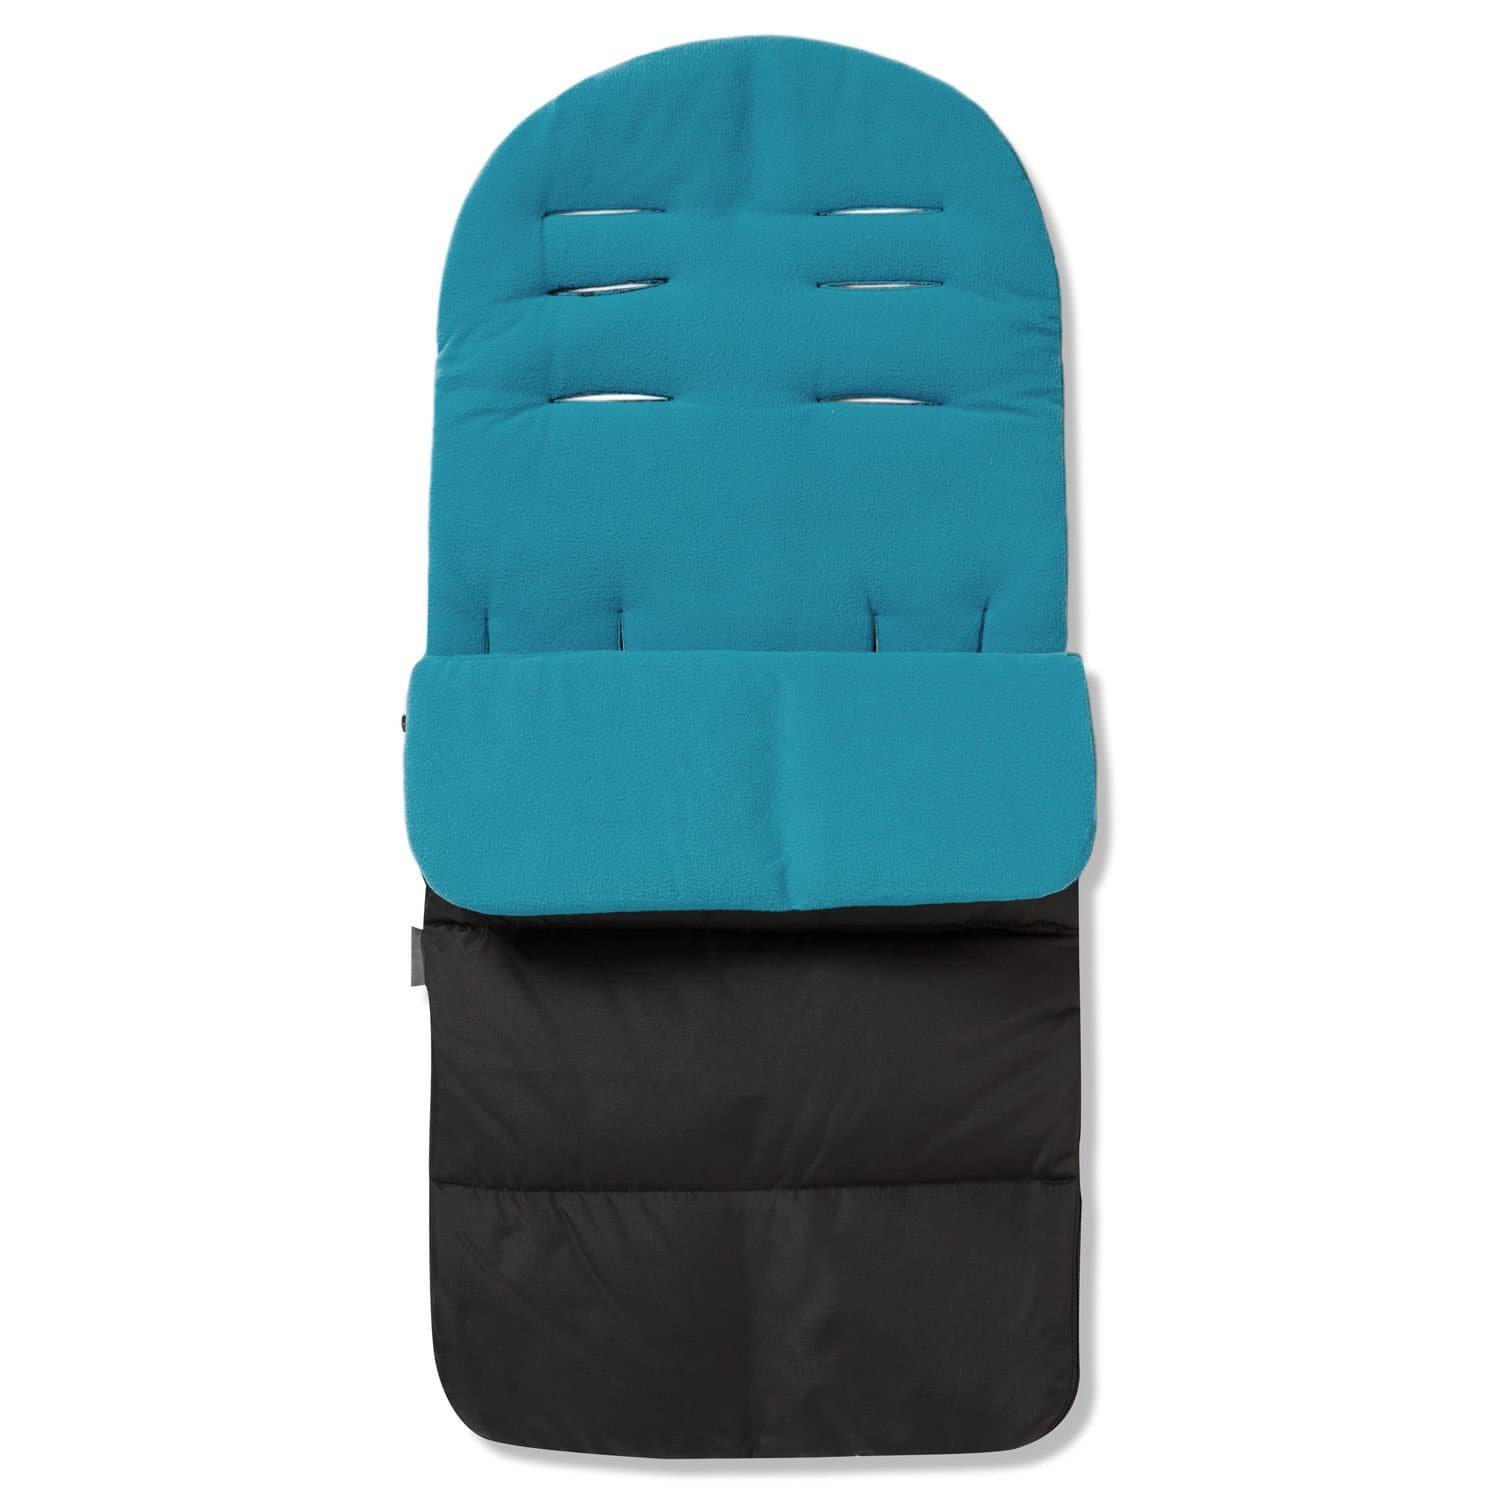 Premium Footmuff / Cosy Toes Compatible with Kiddy - Ocean Blue / Fits All Models | For Your Little One